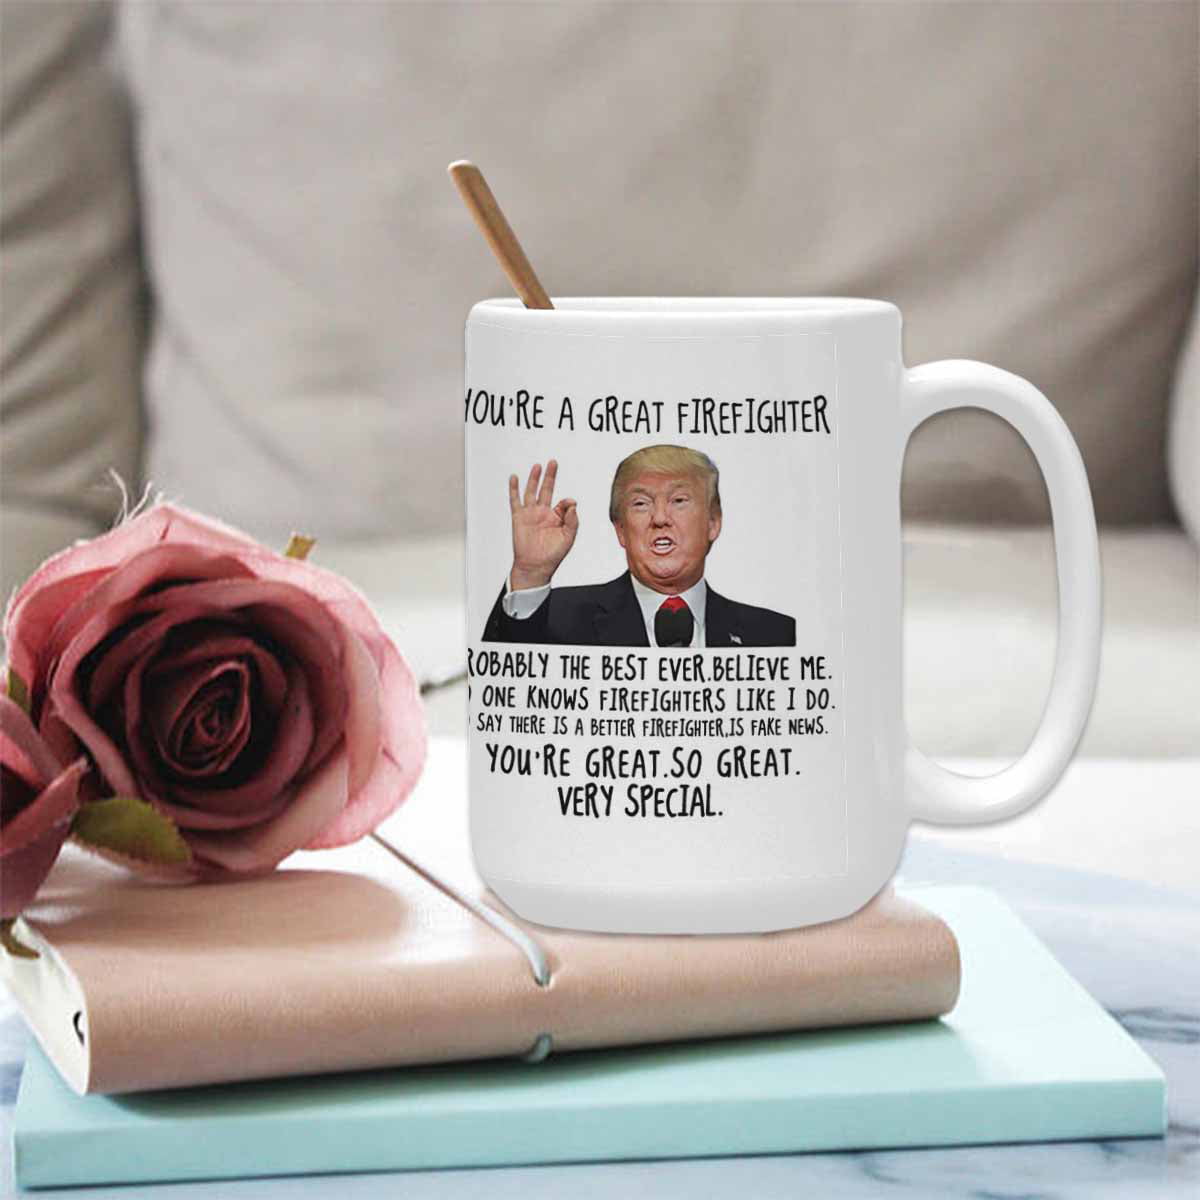 Donald Trump Mug, You are A Really Great Mom - Mothers Day Xmas